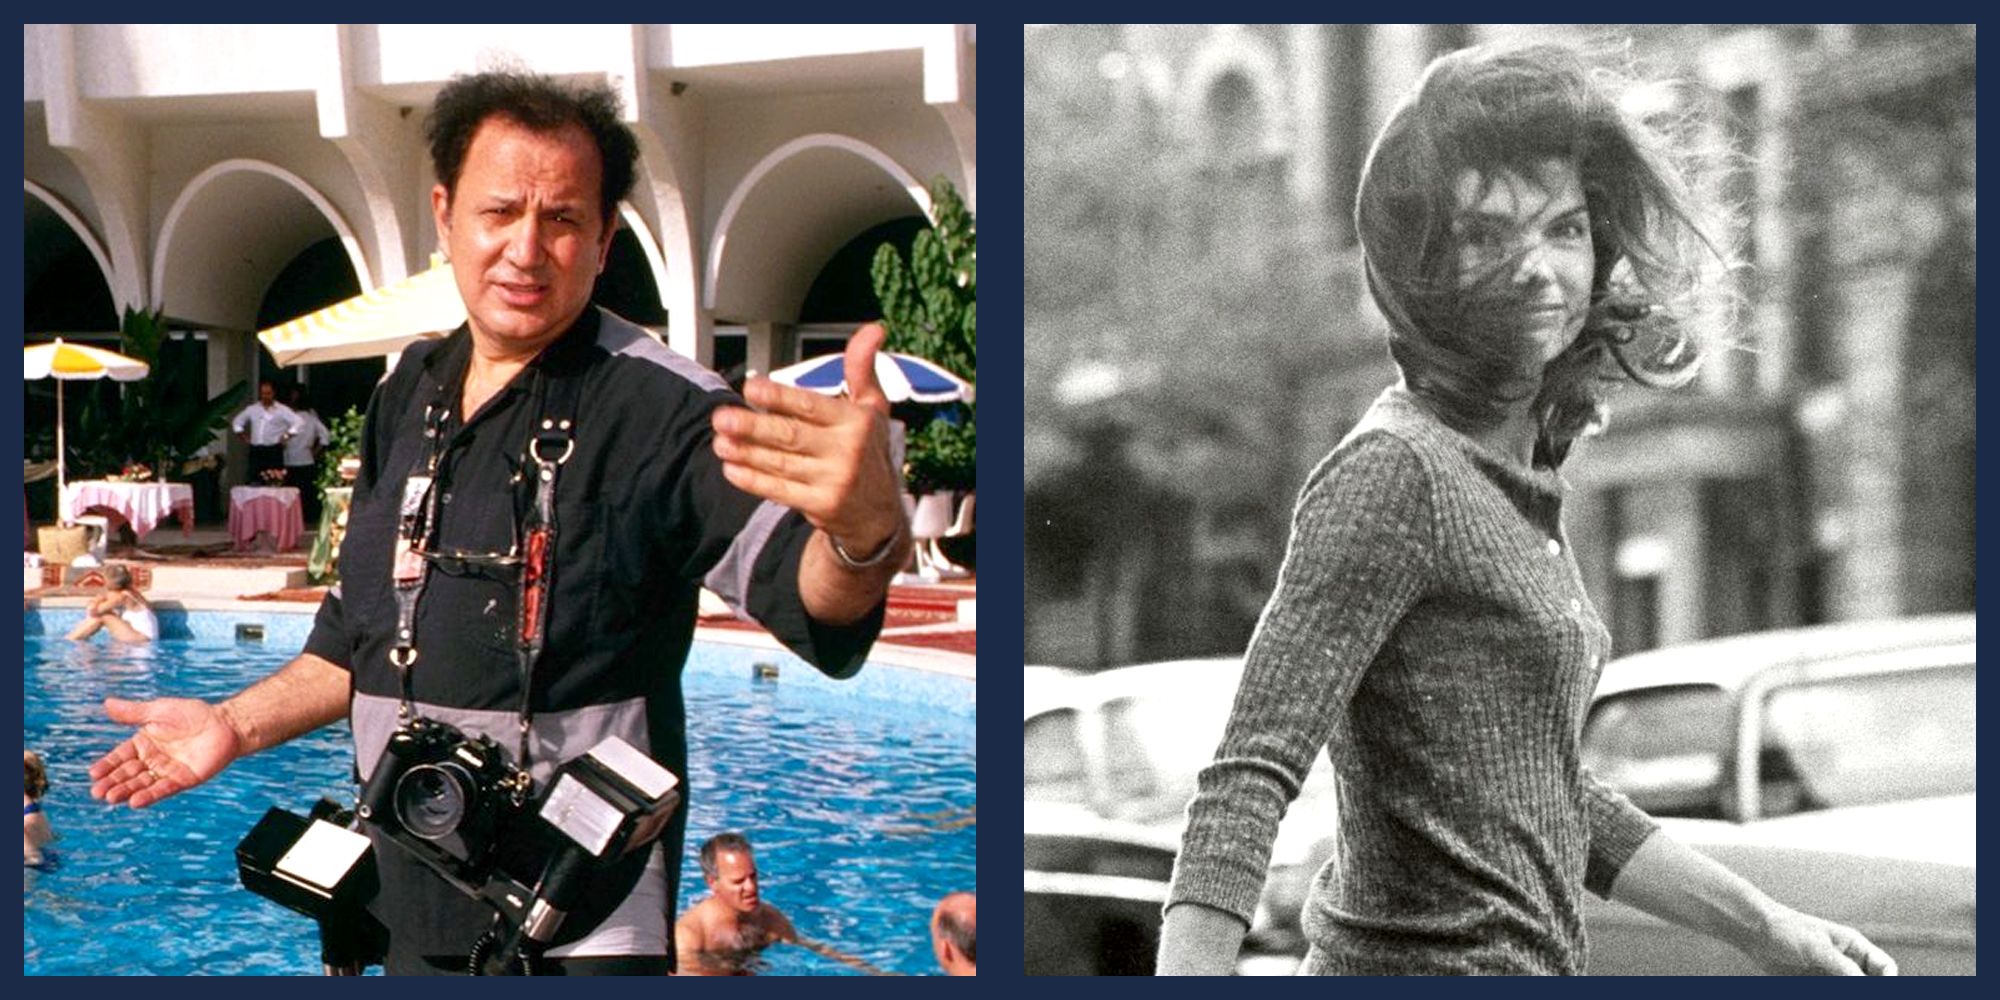 Ron Galella, 'Paparazzo Extraordinaire' and Jackie O fotog, dead at 91